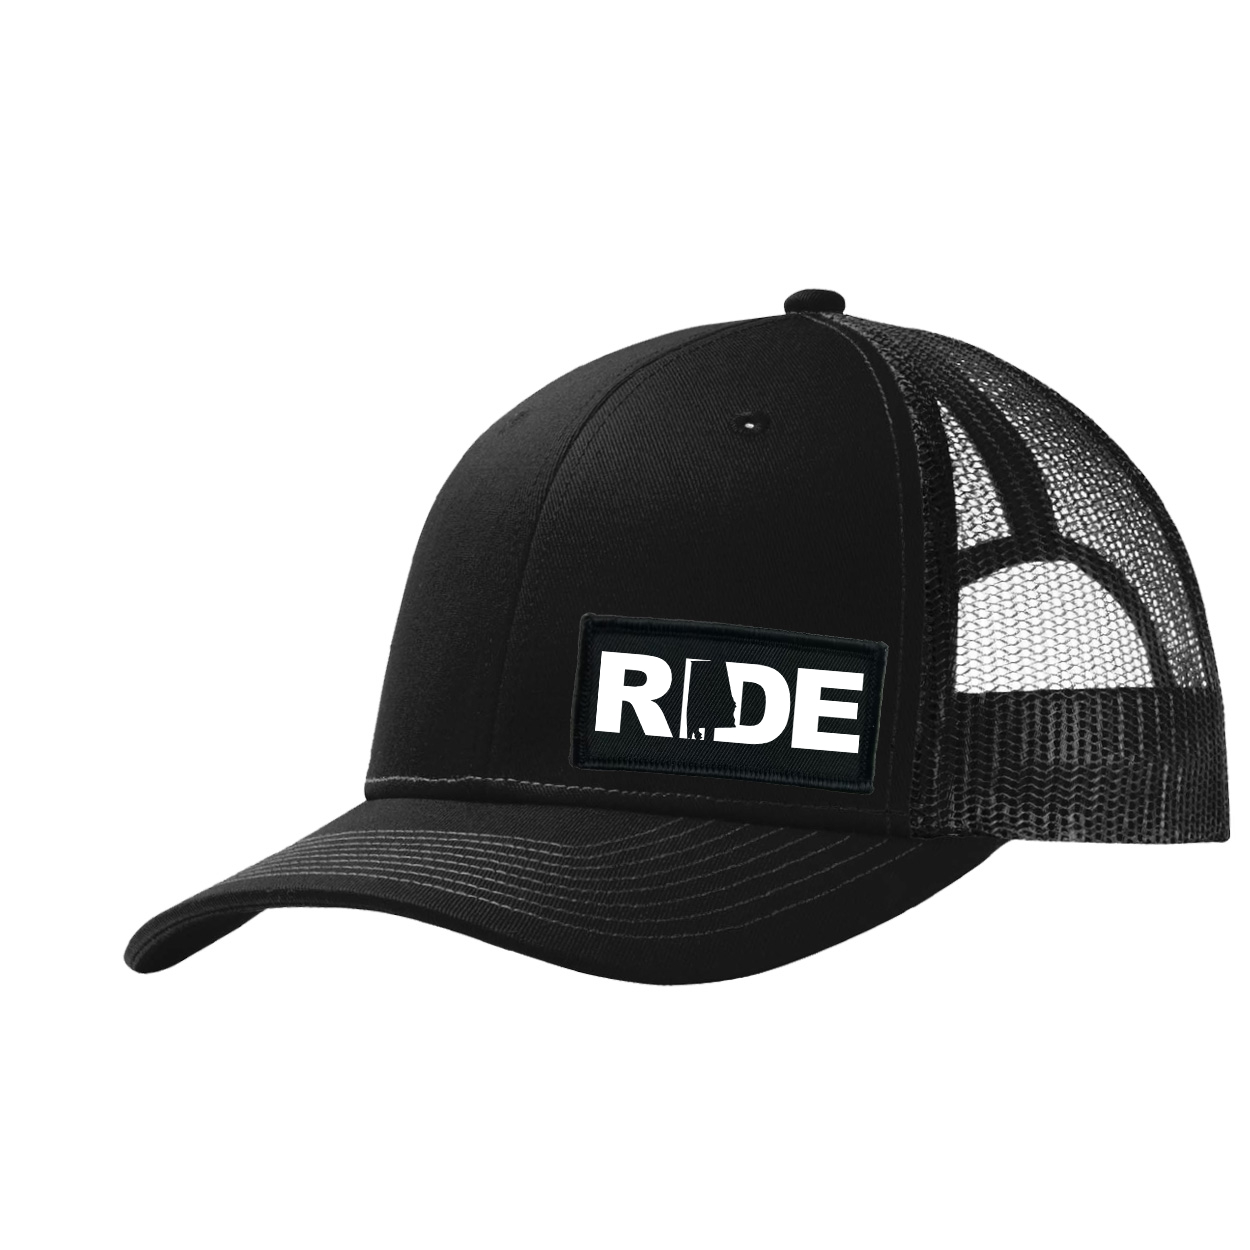 Ride Alabama Night Out Woven Patch Snapback Trucker Hat Black (White Logo)